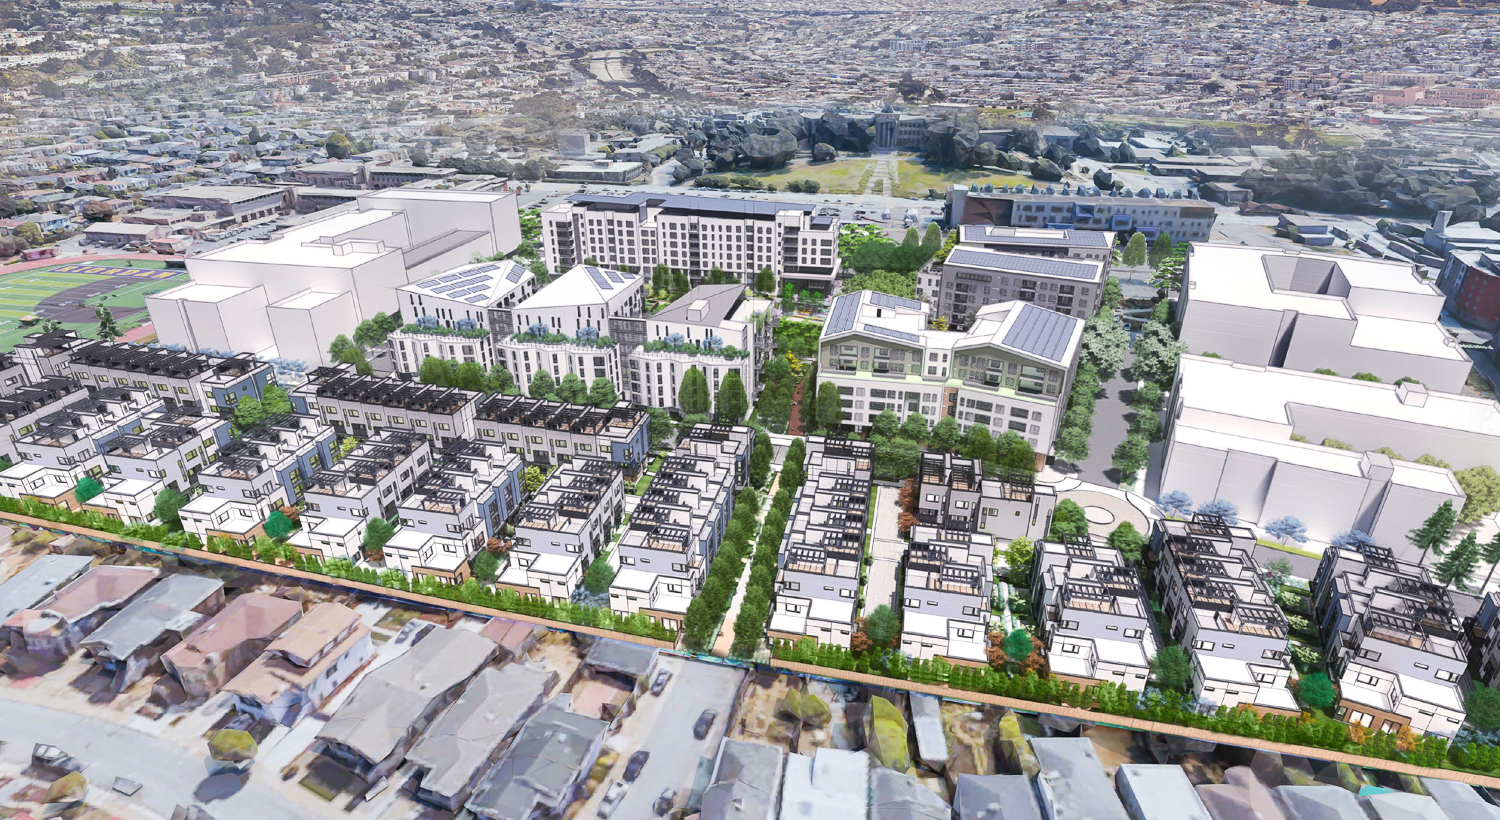 Balboa Reservoir masterplan aerial view with townhomes in the foreground, rendering by Dahlin